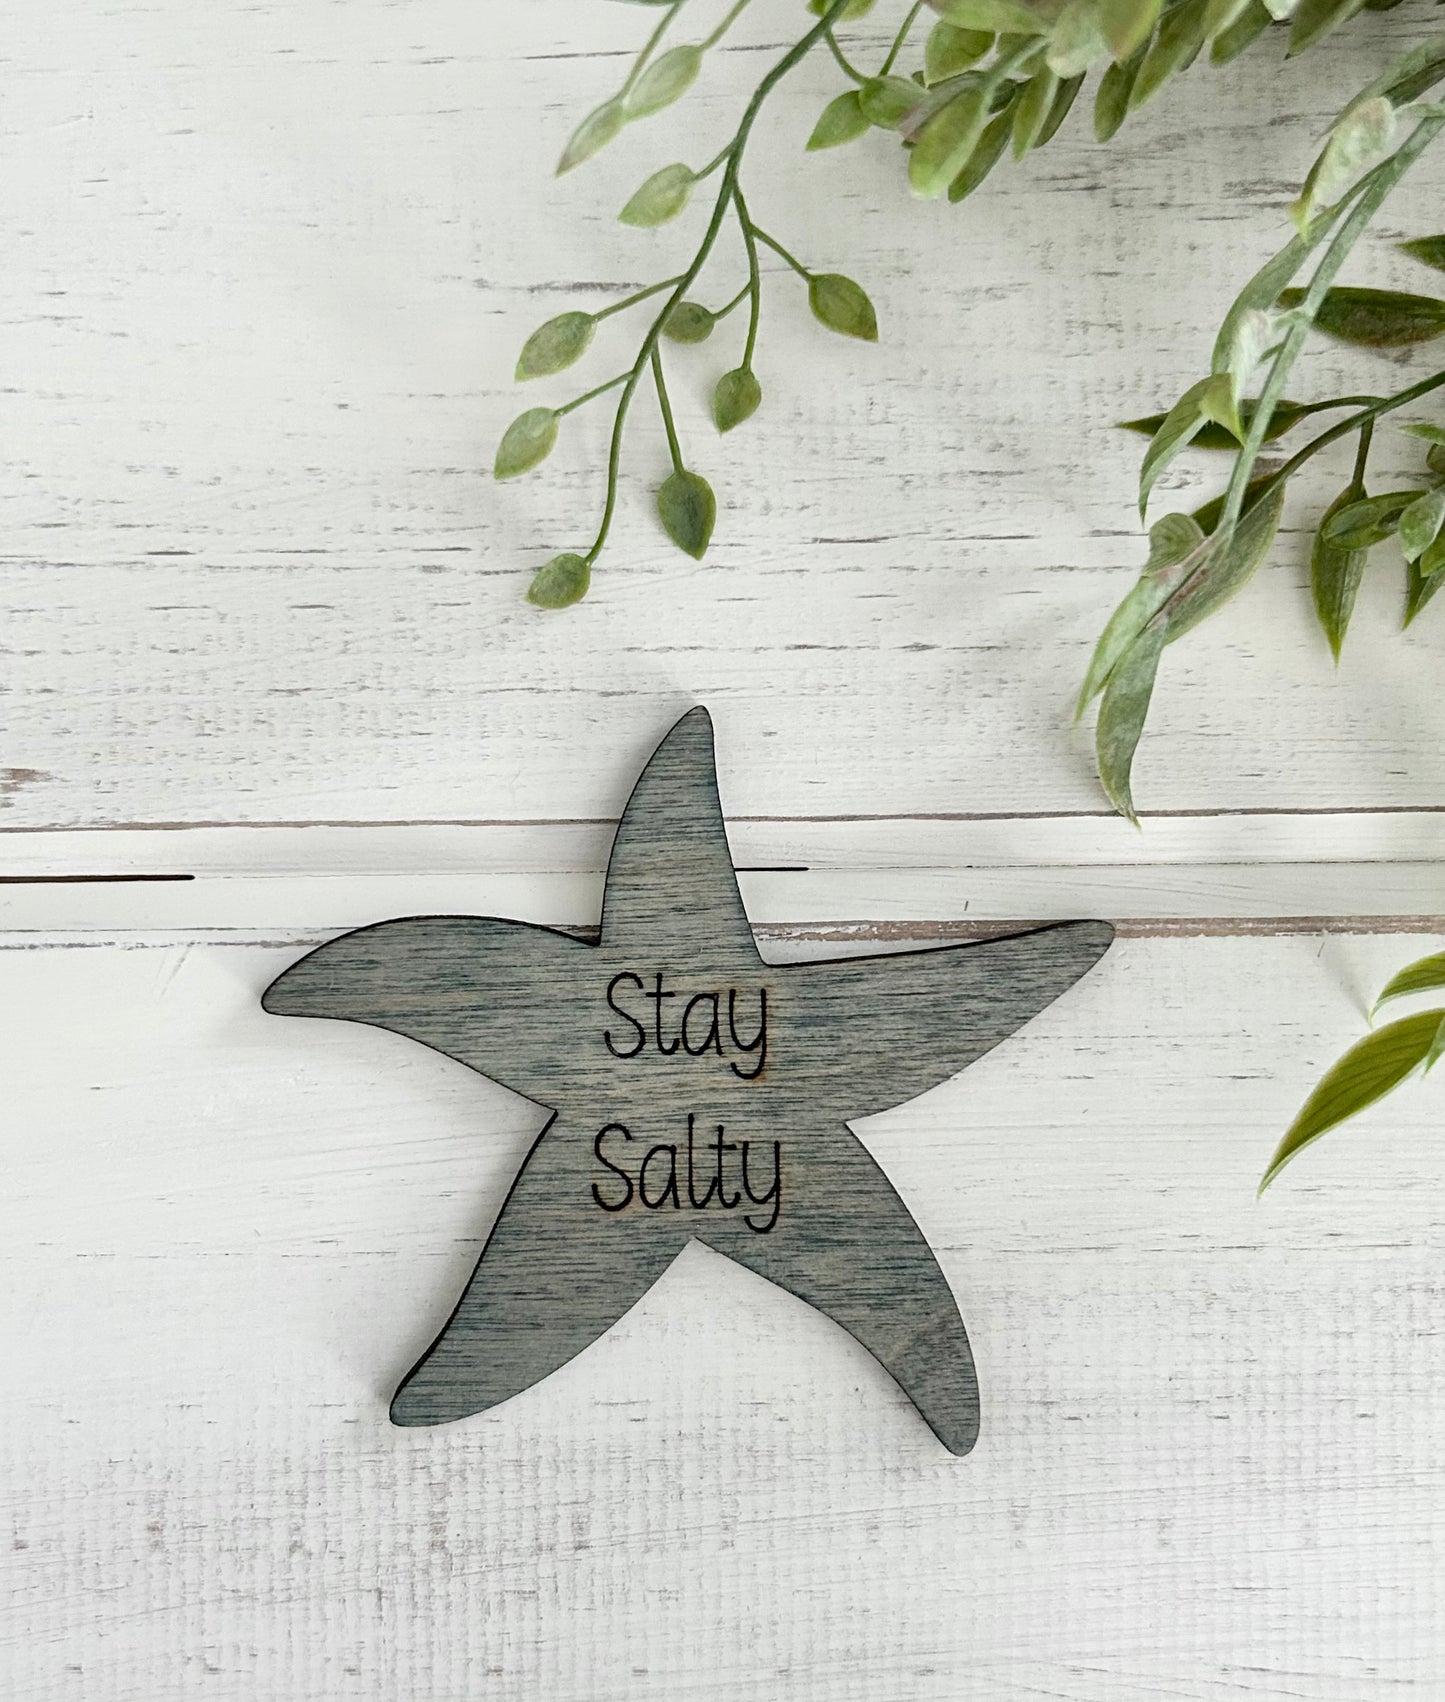 "Stay salty" wood starfish magnet